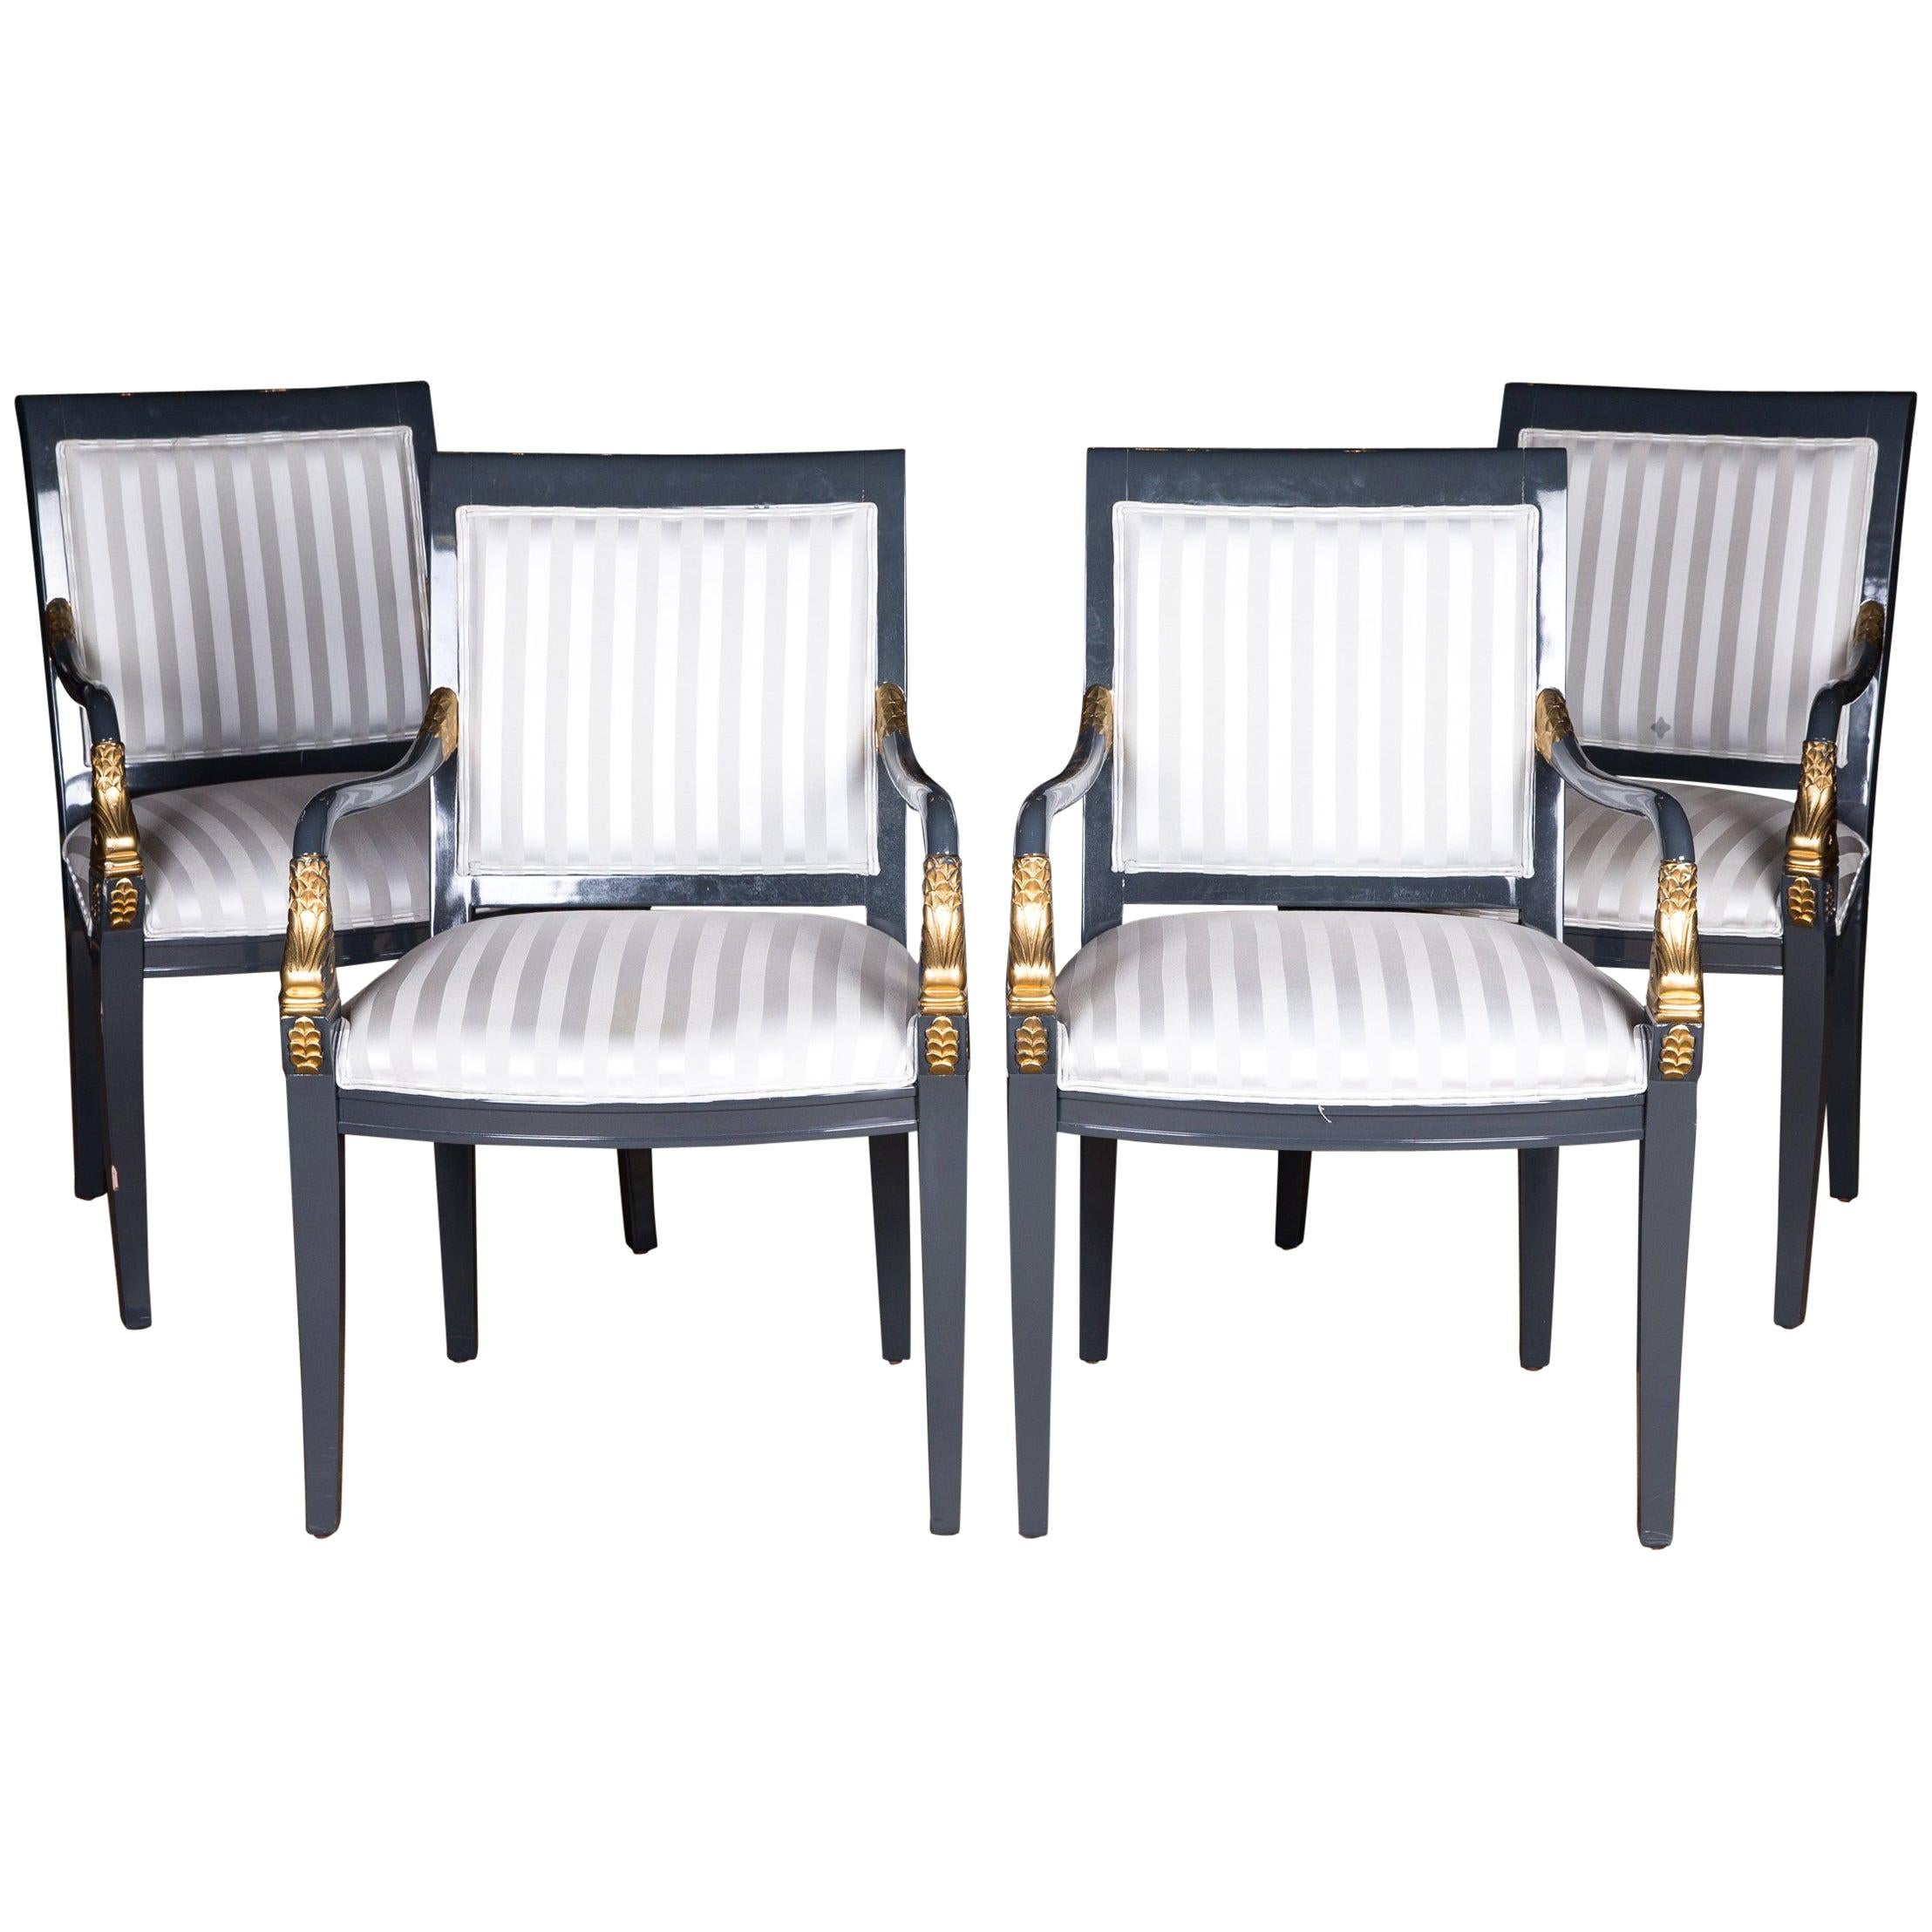 Four Exclusive Italian Armchairs Decorated with Gold